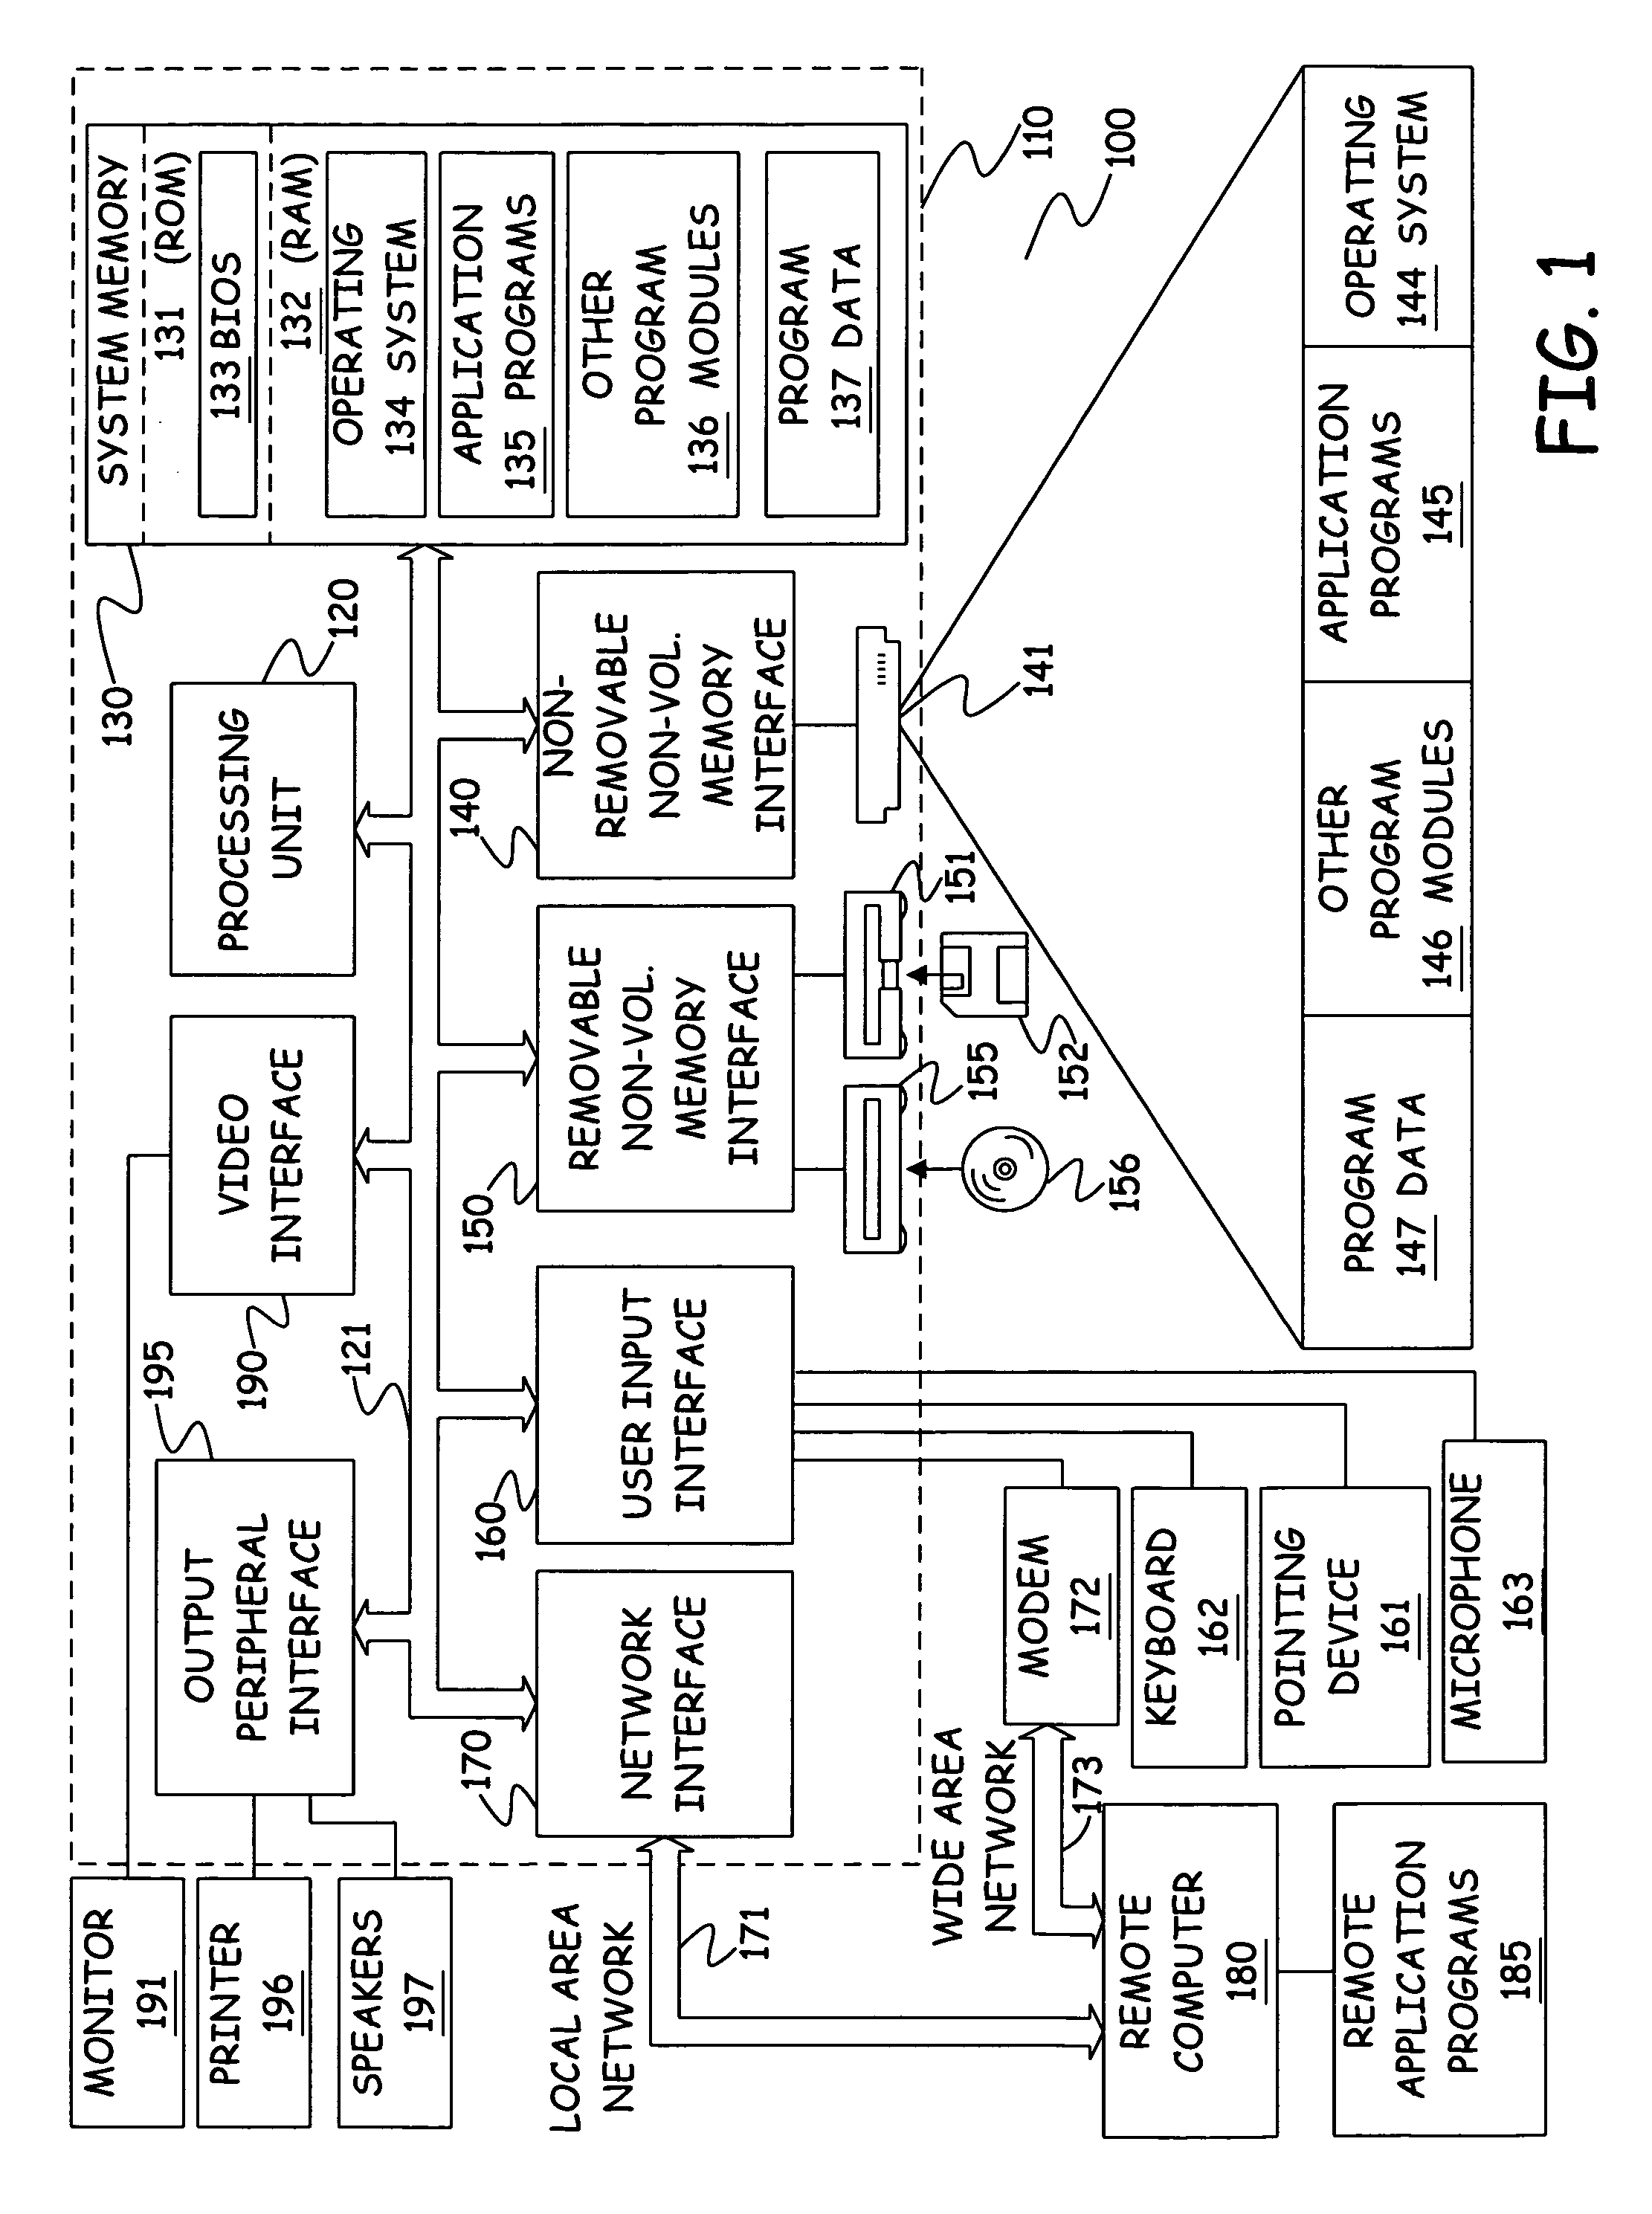 Method and apparatus for automatic grammar generation from data entries